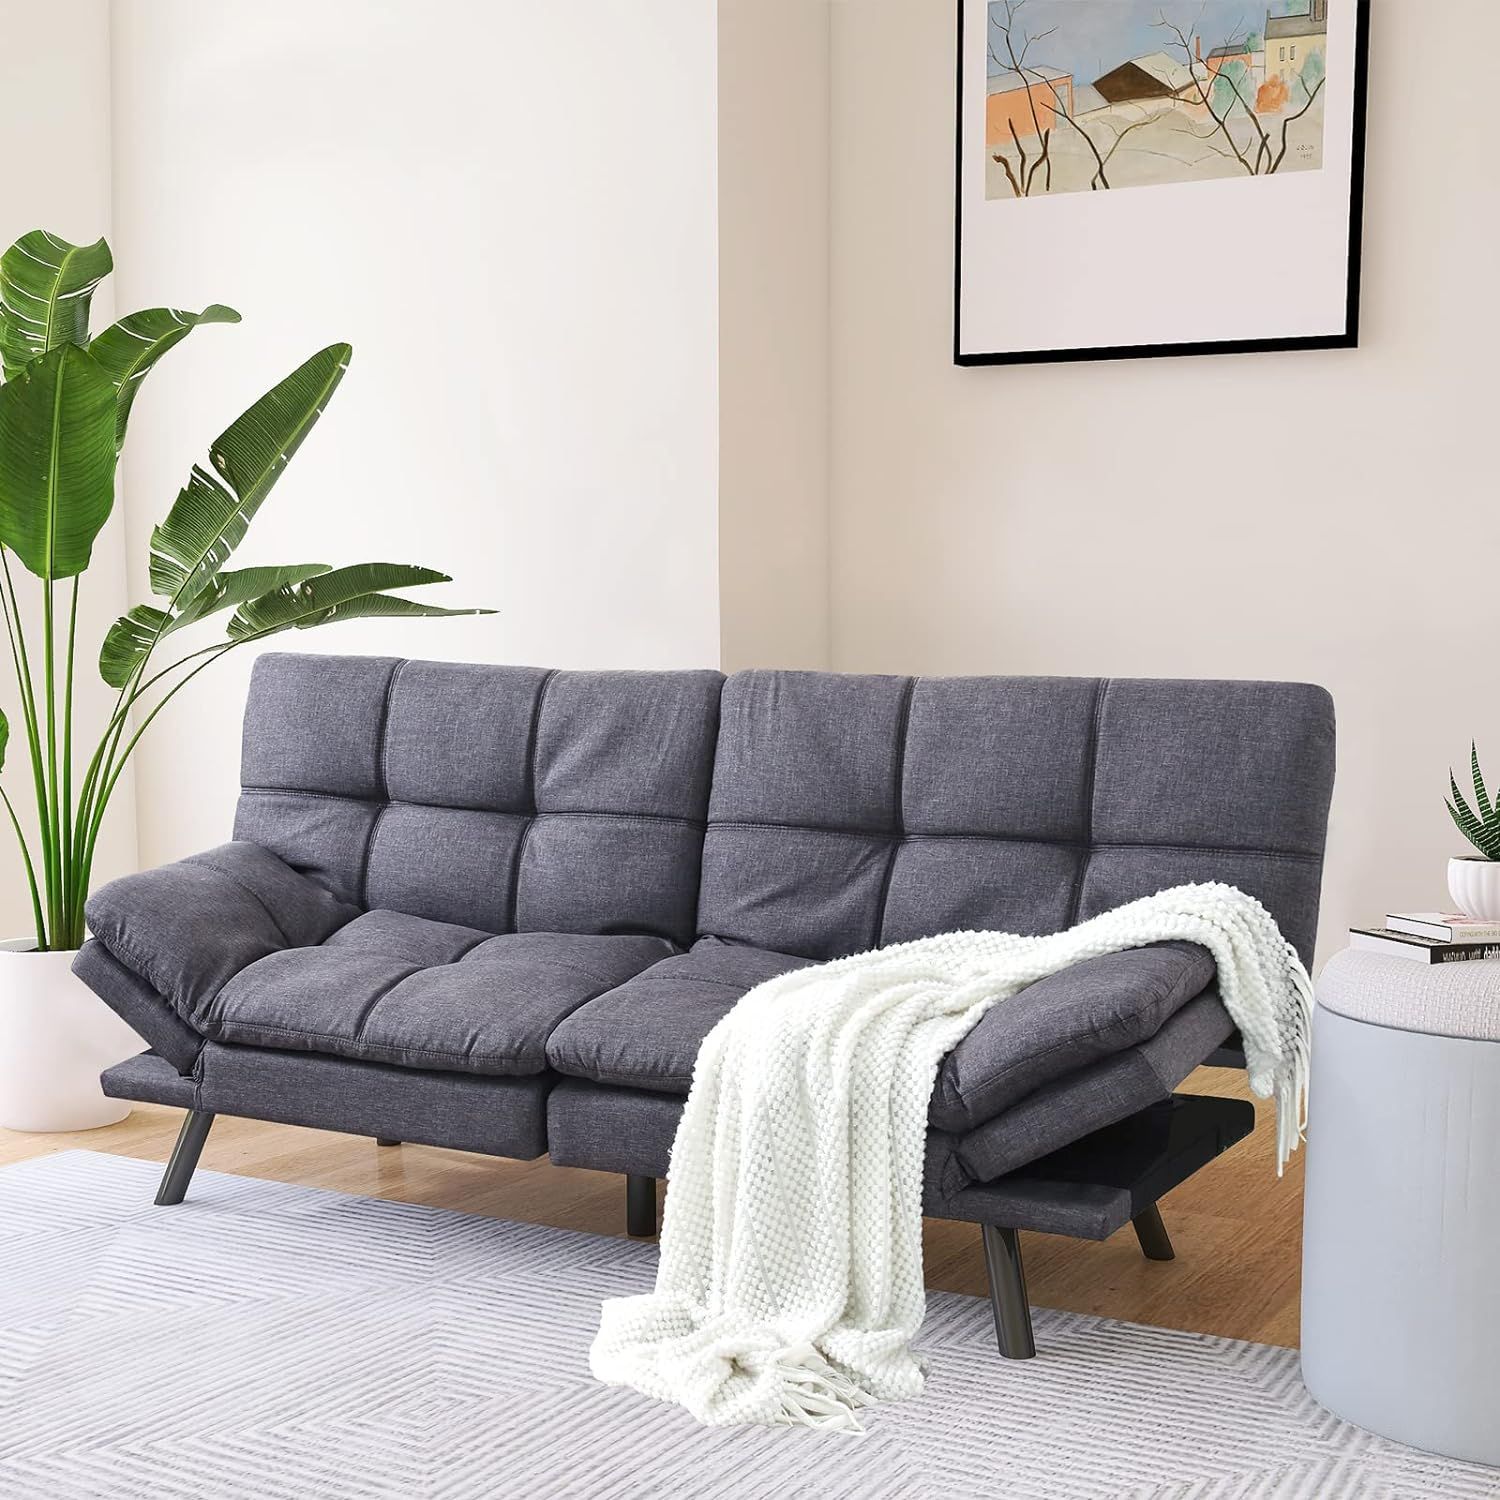 Compact Futon Sofa Bed With Memory Foam, Convertible Malaysia | Ubuy Intended For Black Faux Suede Memory Foam Sofas (View 15 of 15)